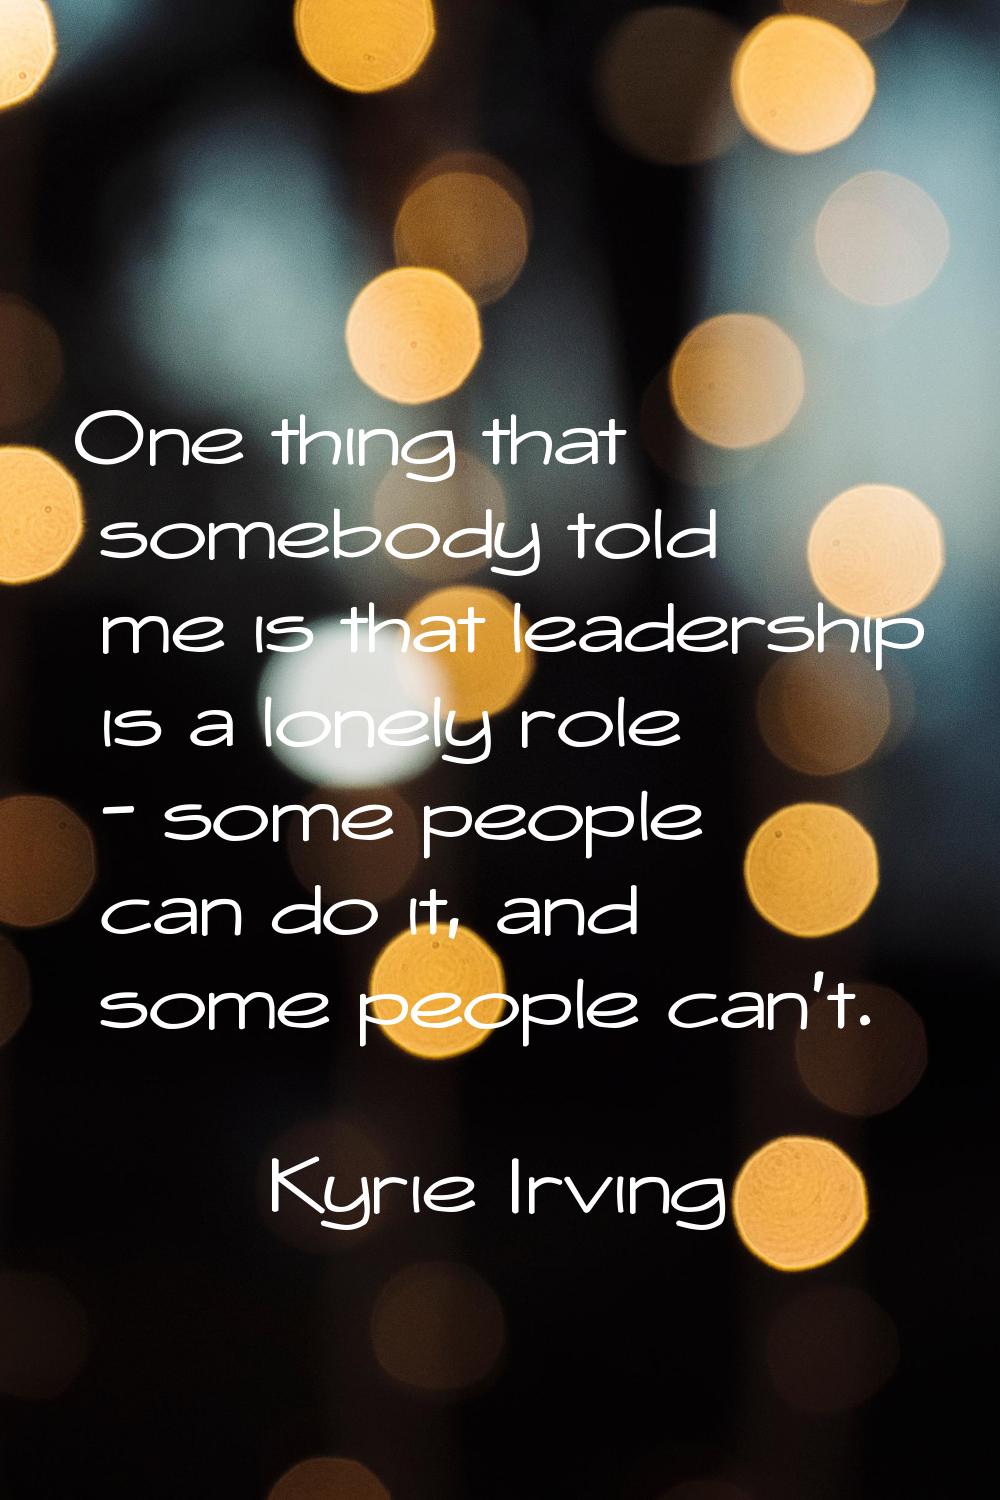 One thing that somebody told me is that leadership is a lonely role - some people can do it, and so